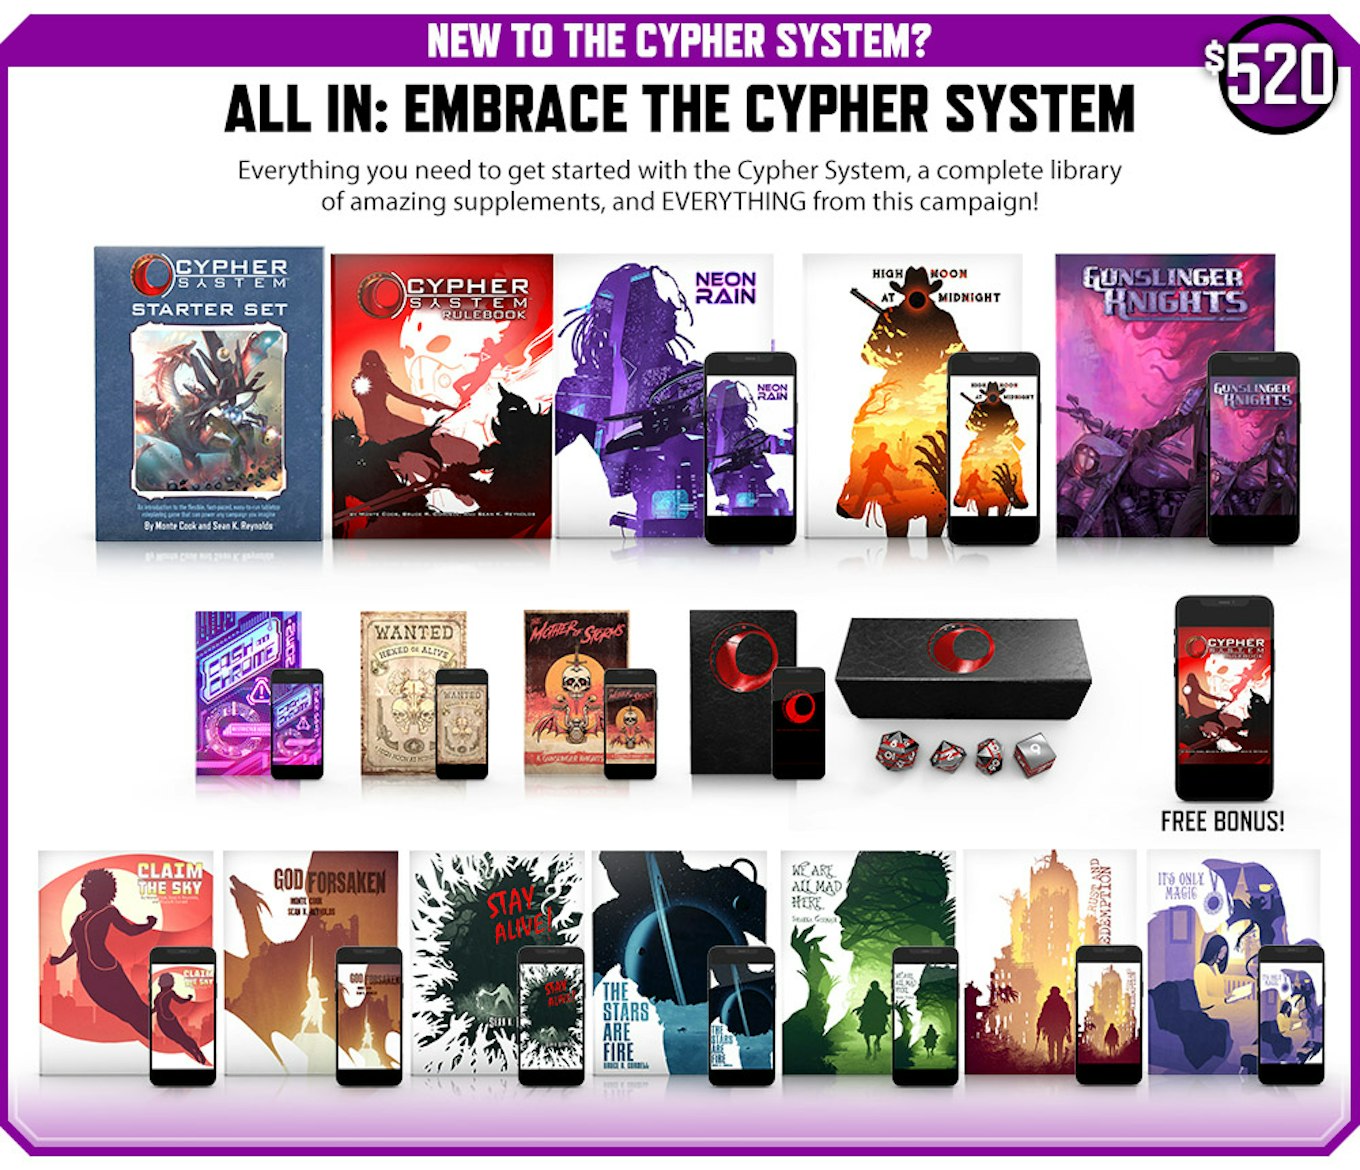 New to the Cypher System? All In: Embrace the Cypher System backer level. Everything you need to get started with the Cypher System, a complete library of amazing supplements, and EVERYTHING from this campaign! $520